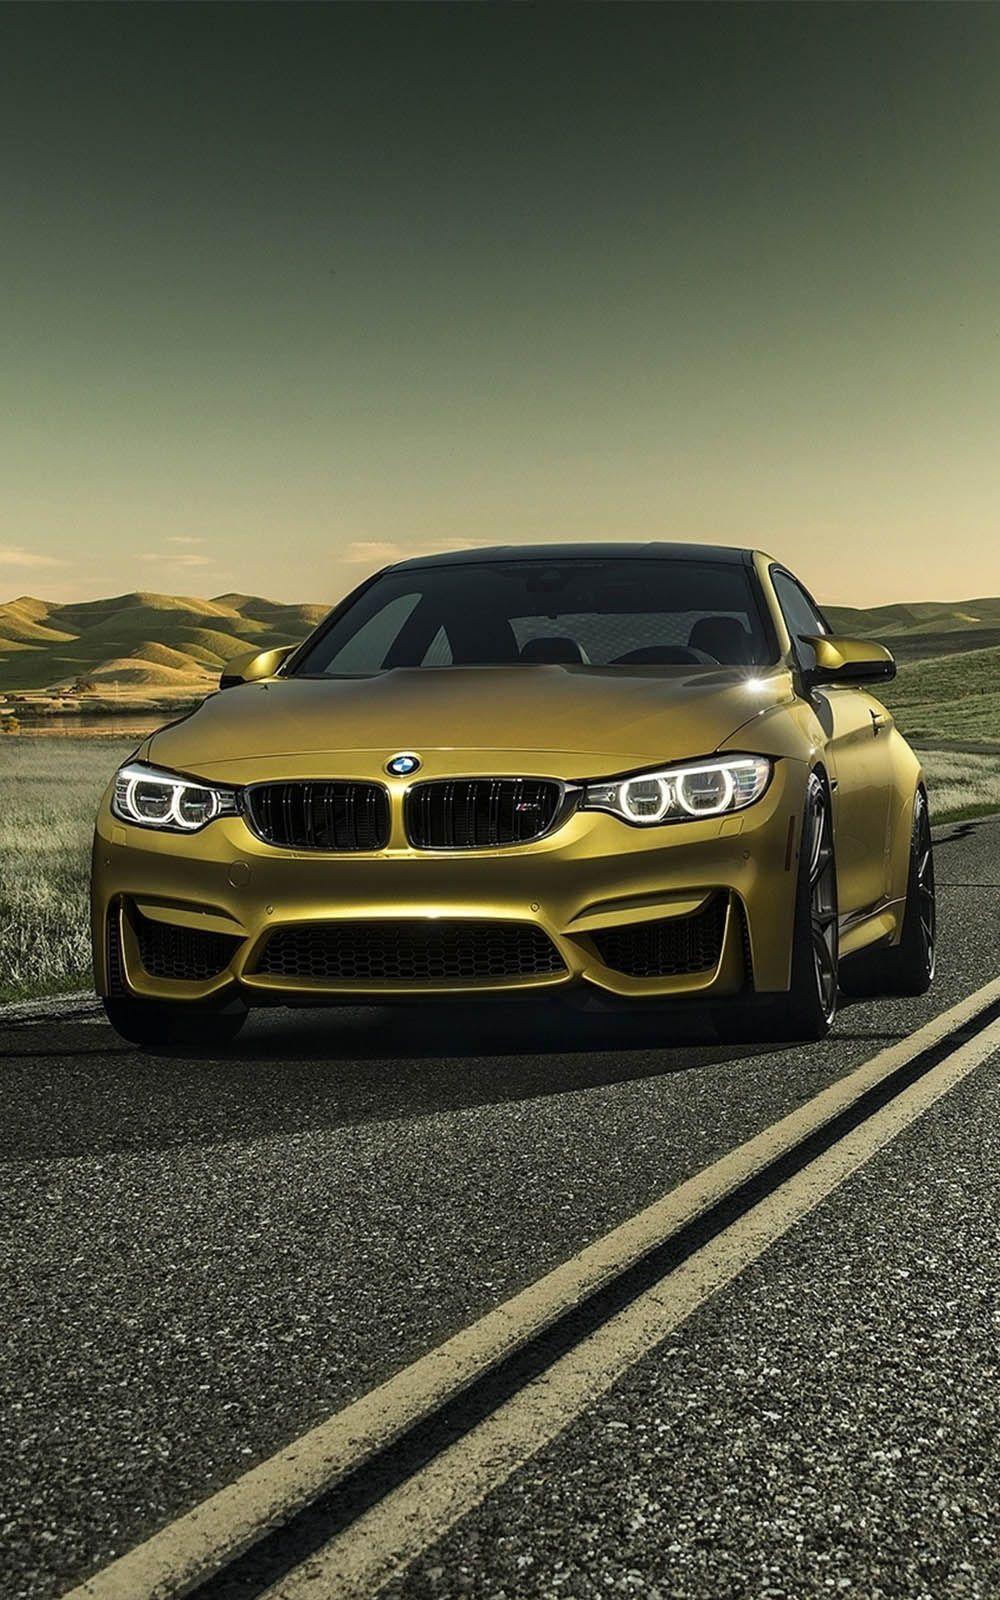 BMW M4 Mobile Wallpaper Free 100% Pure HD Quality Mobile